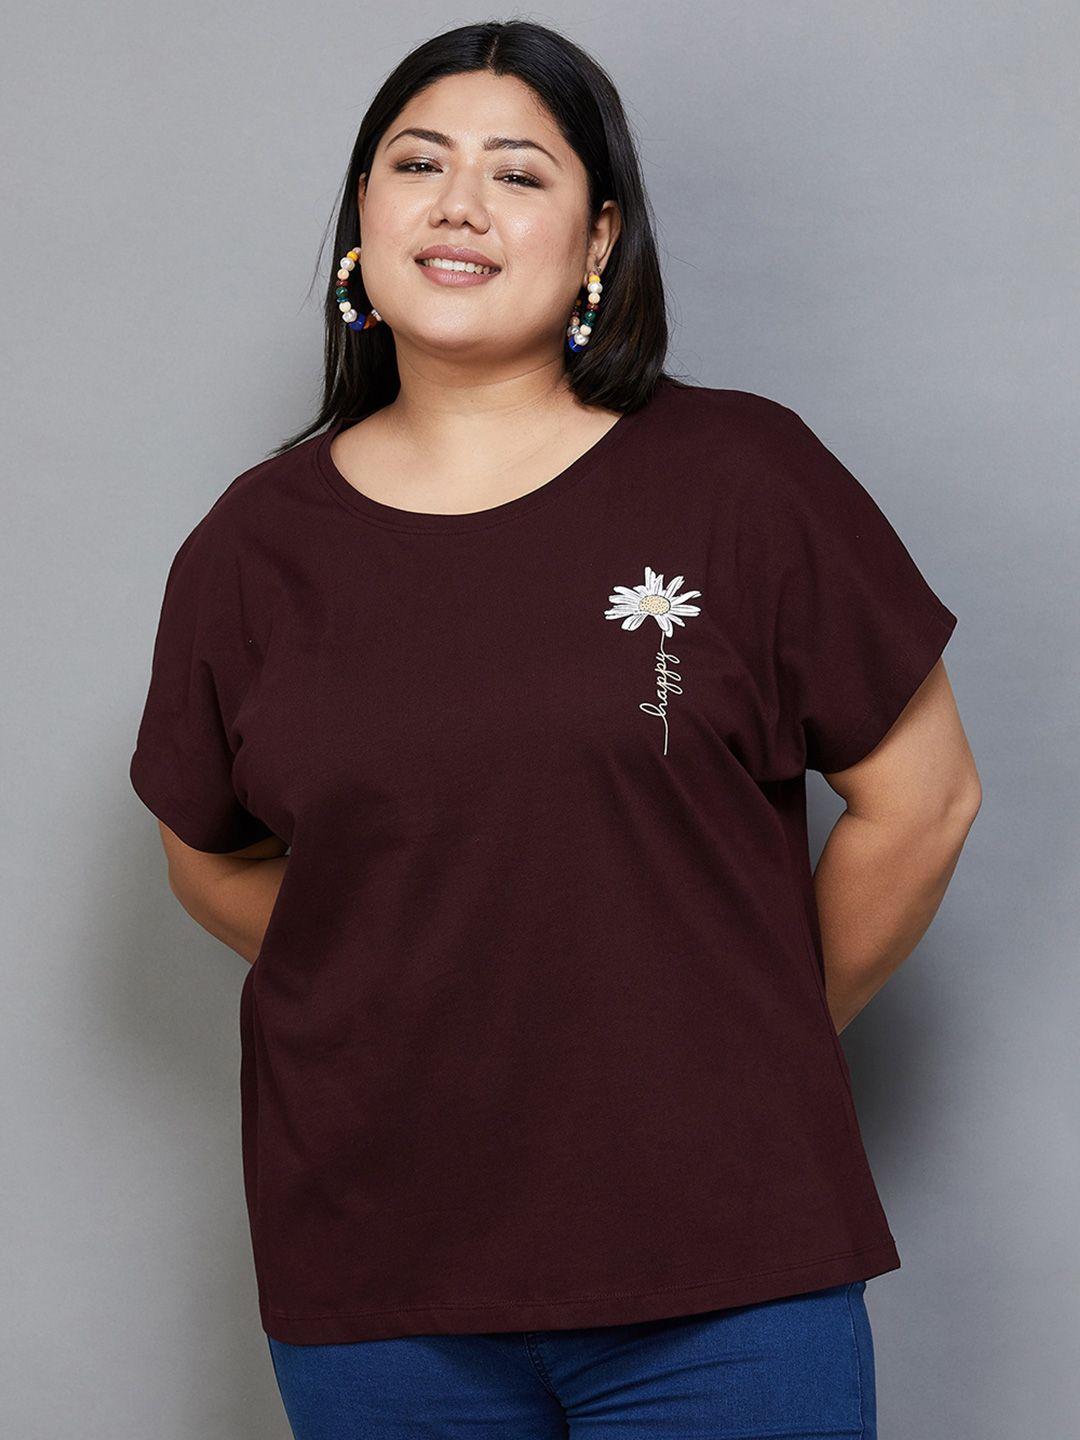 nexus by lifestyle extended sleeves cotton top